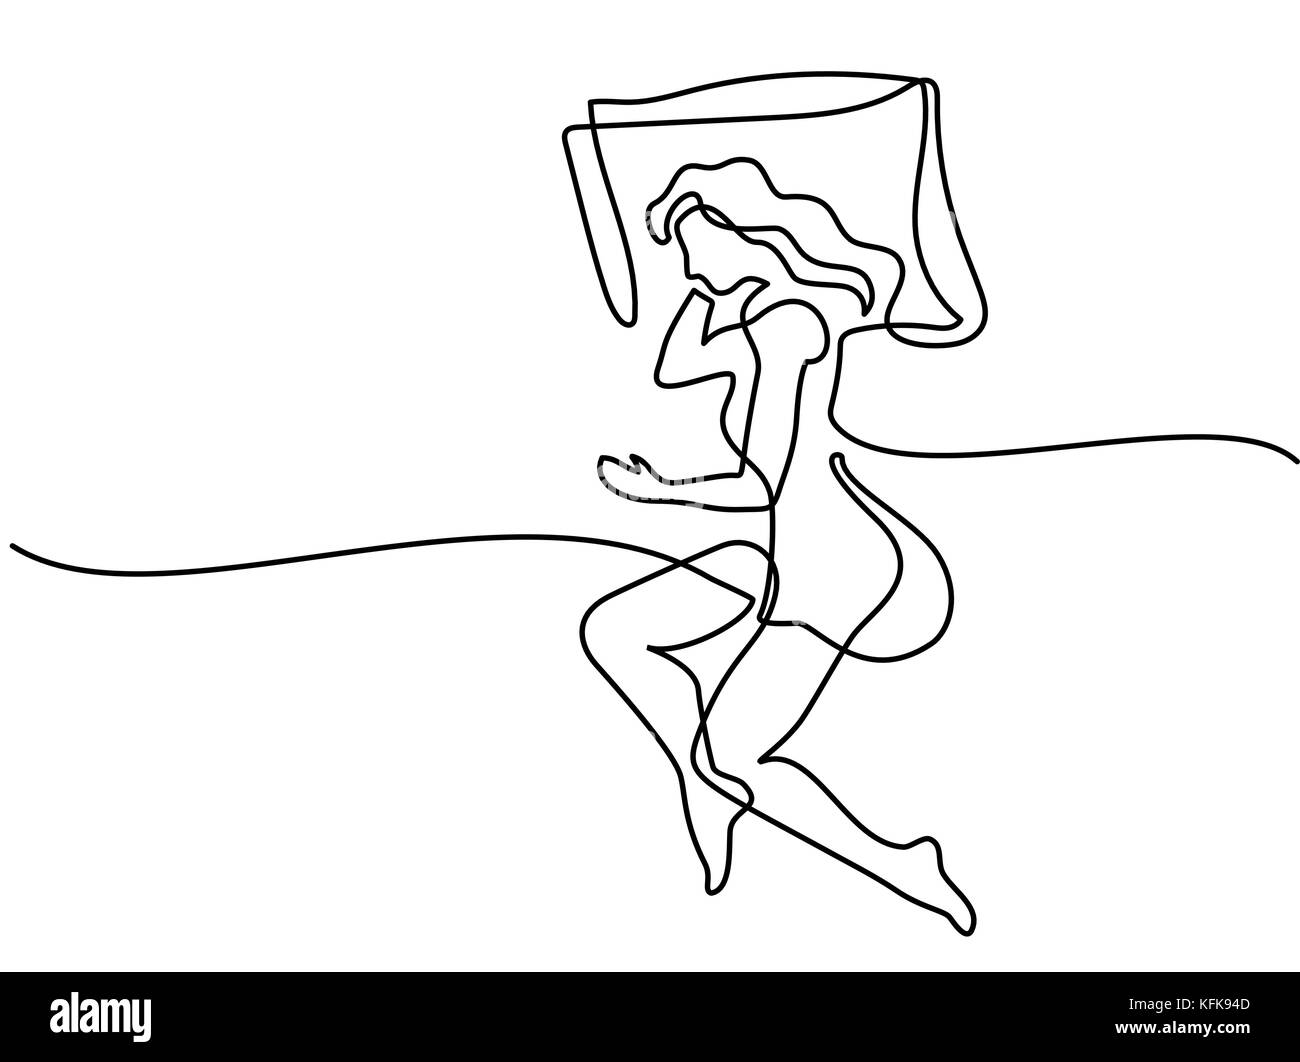 Premium Vector | Contour drawing of a sleeping cat in various poses cat is  sleeping in different positions